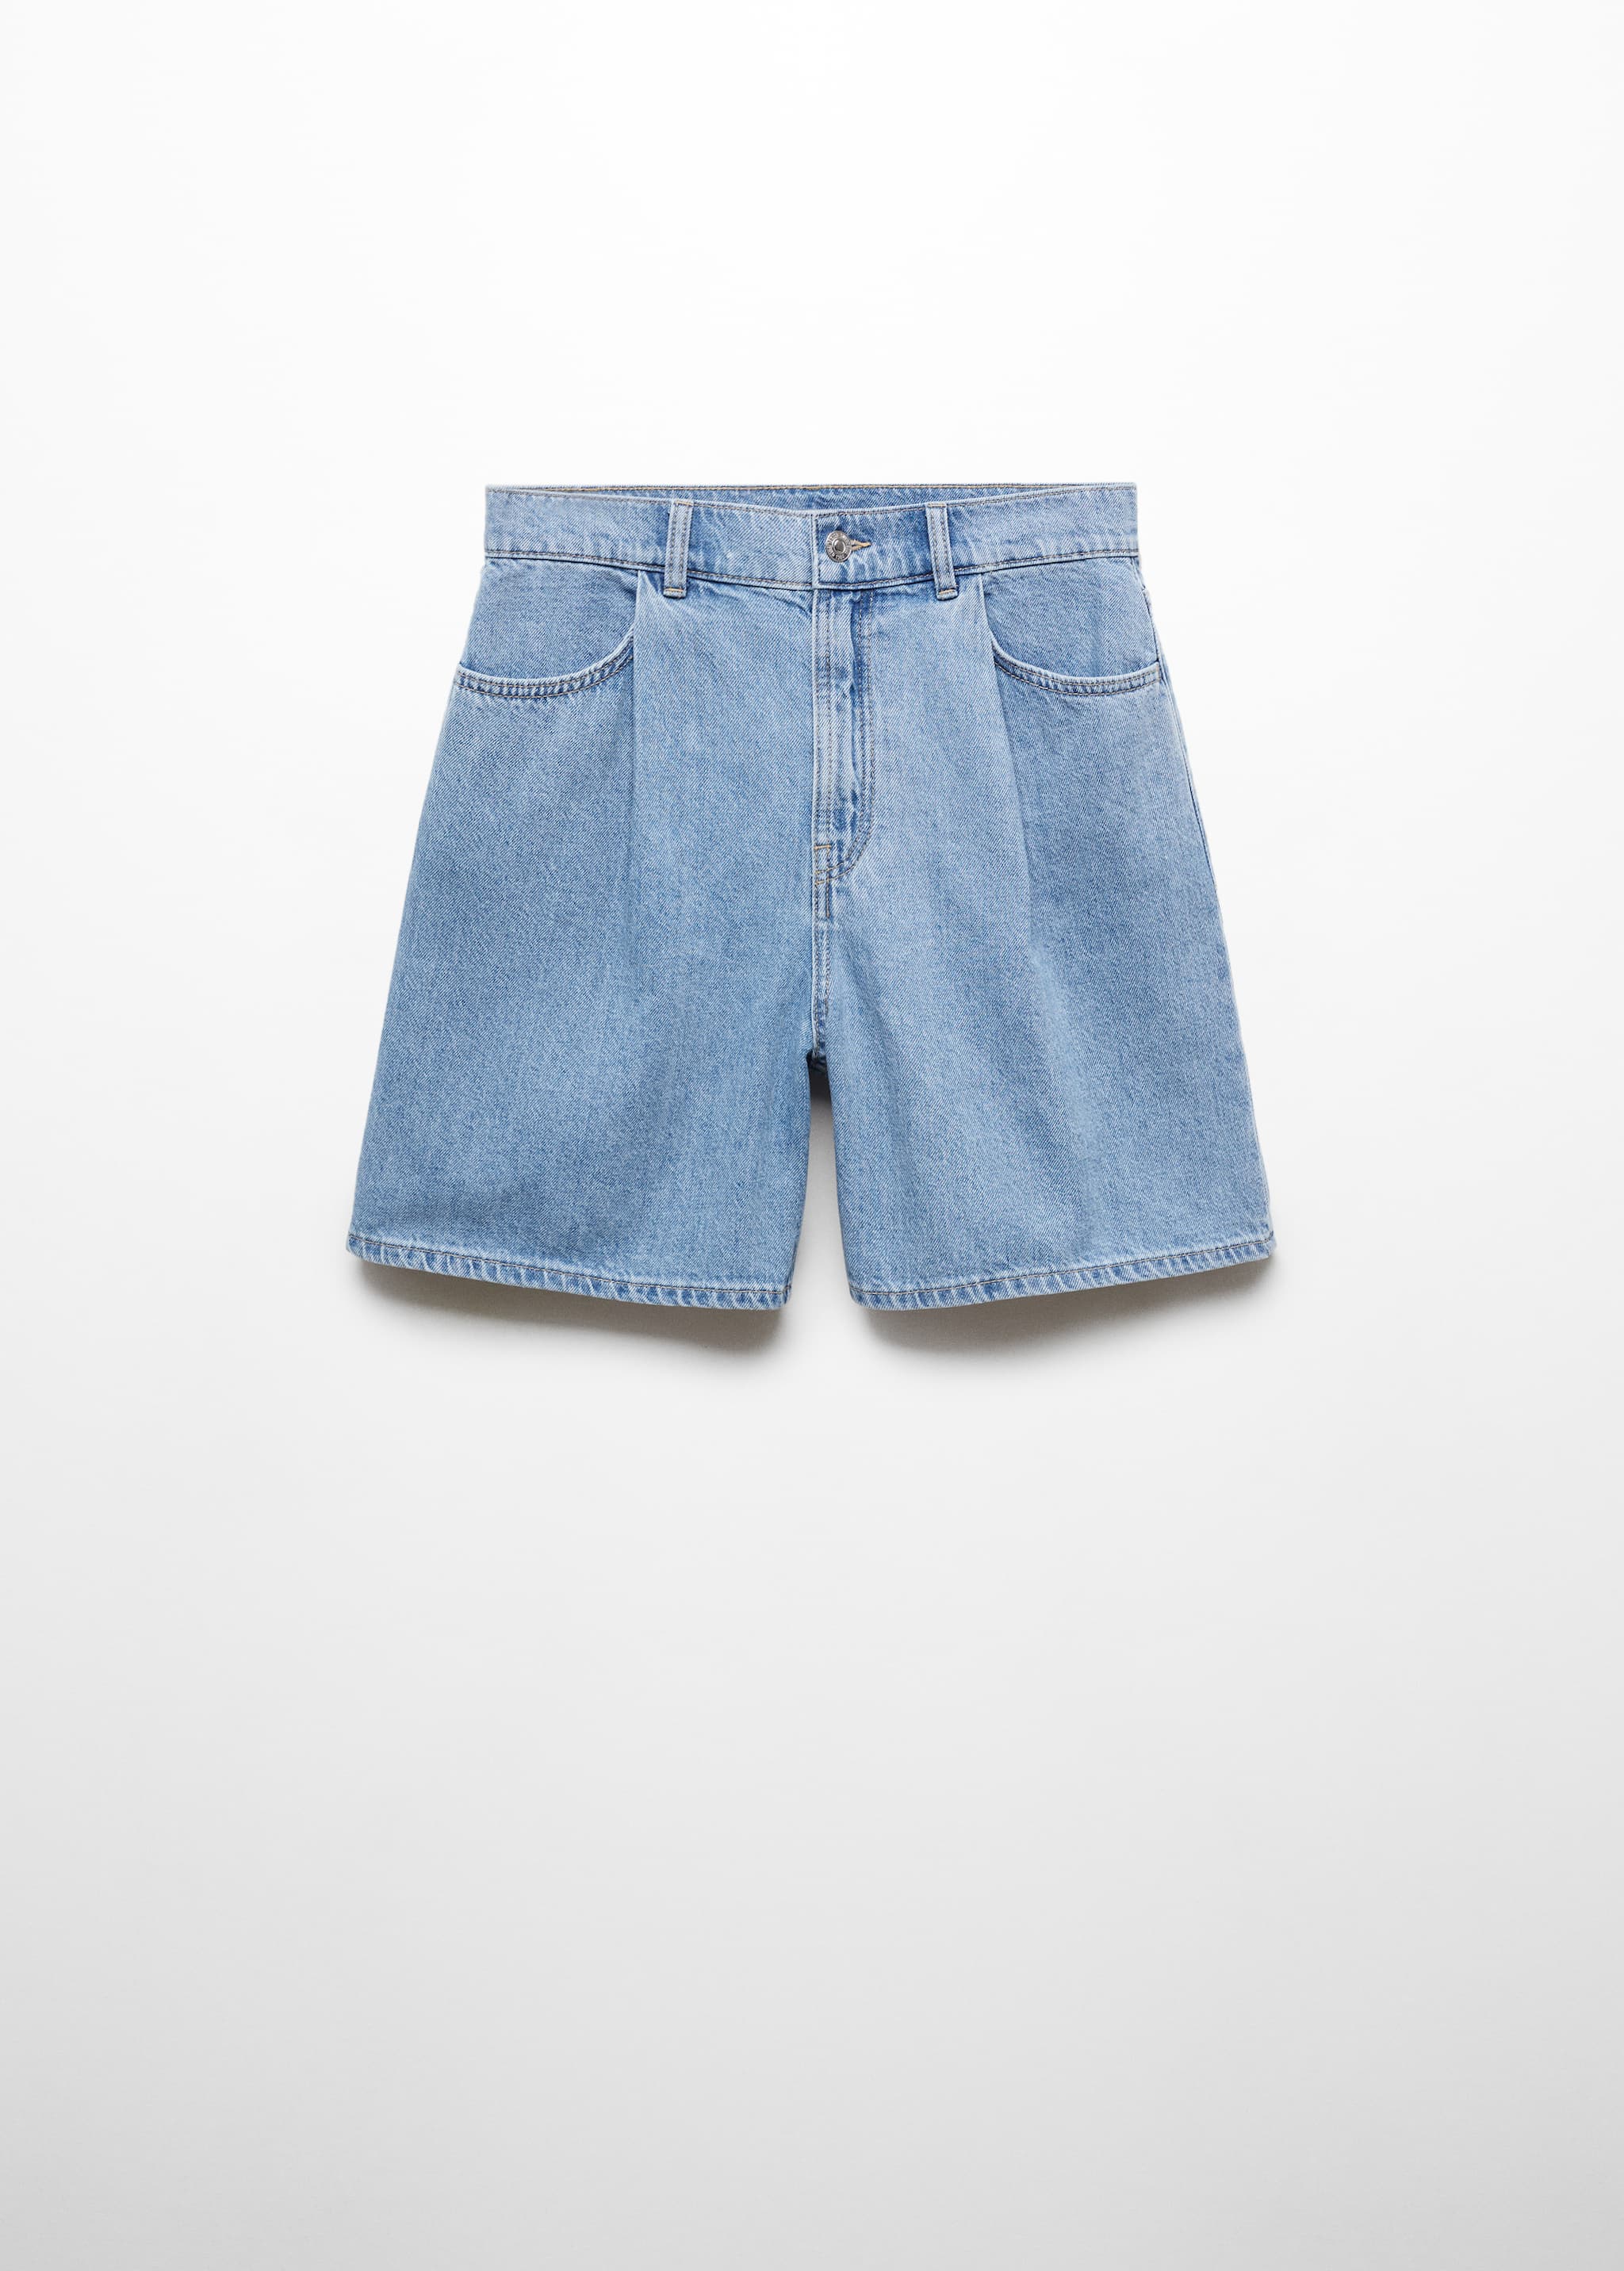 Denim shorts with pleats - Article without model